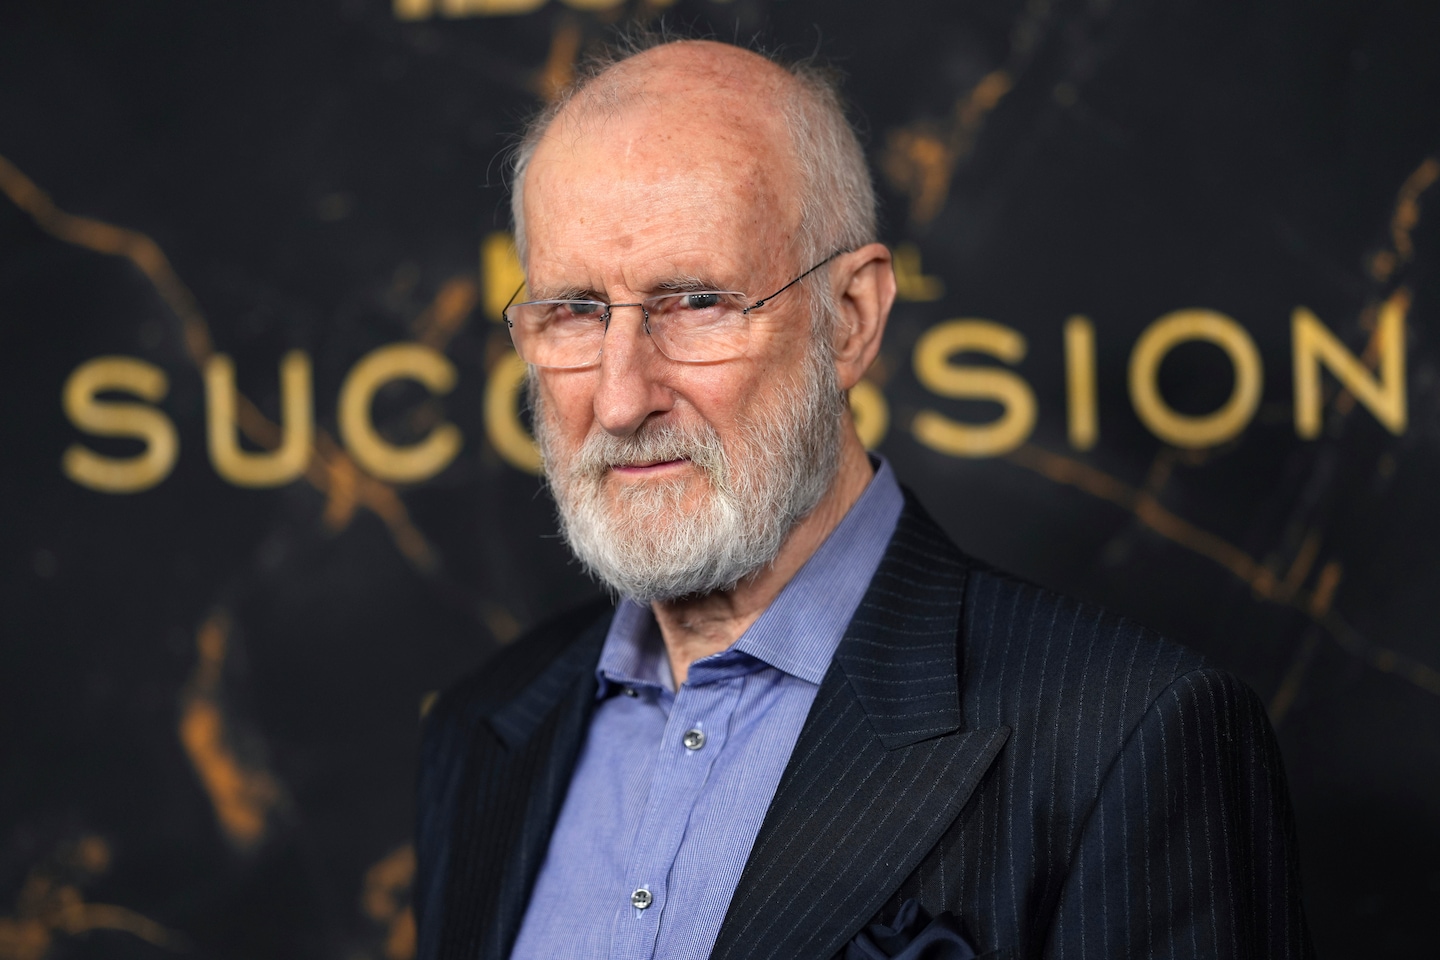 Actor James Cromwell talks Starbucks superglue protest and public activism